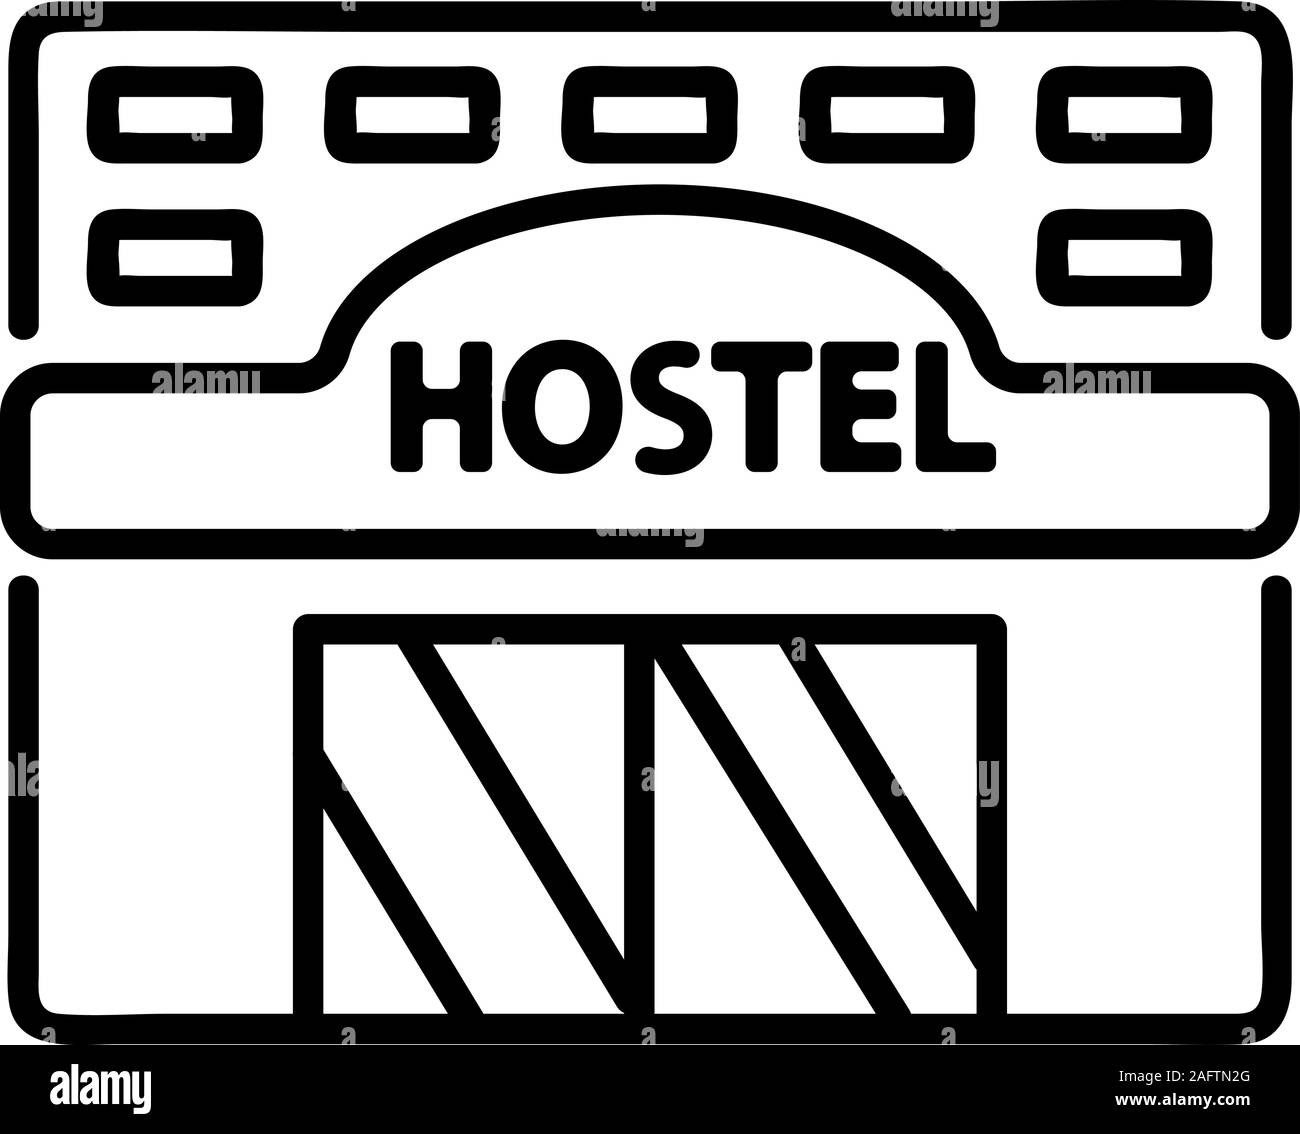 The building of the hostel is an icon vector. Isolated contour symbol illustration Stock Vector